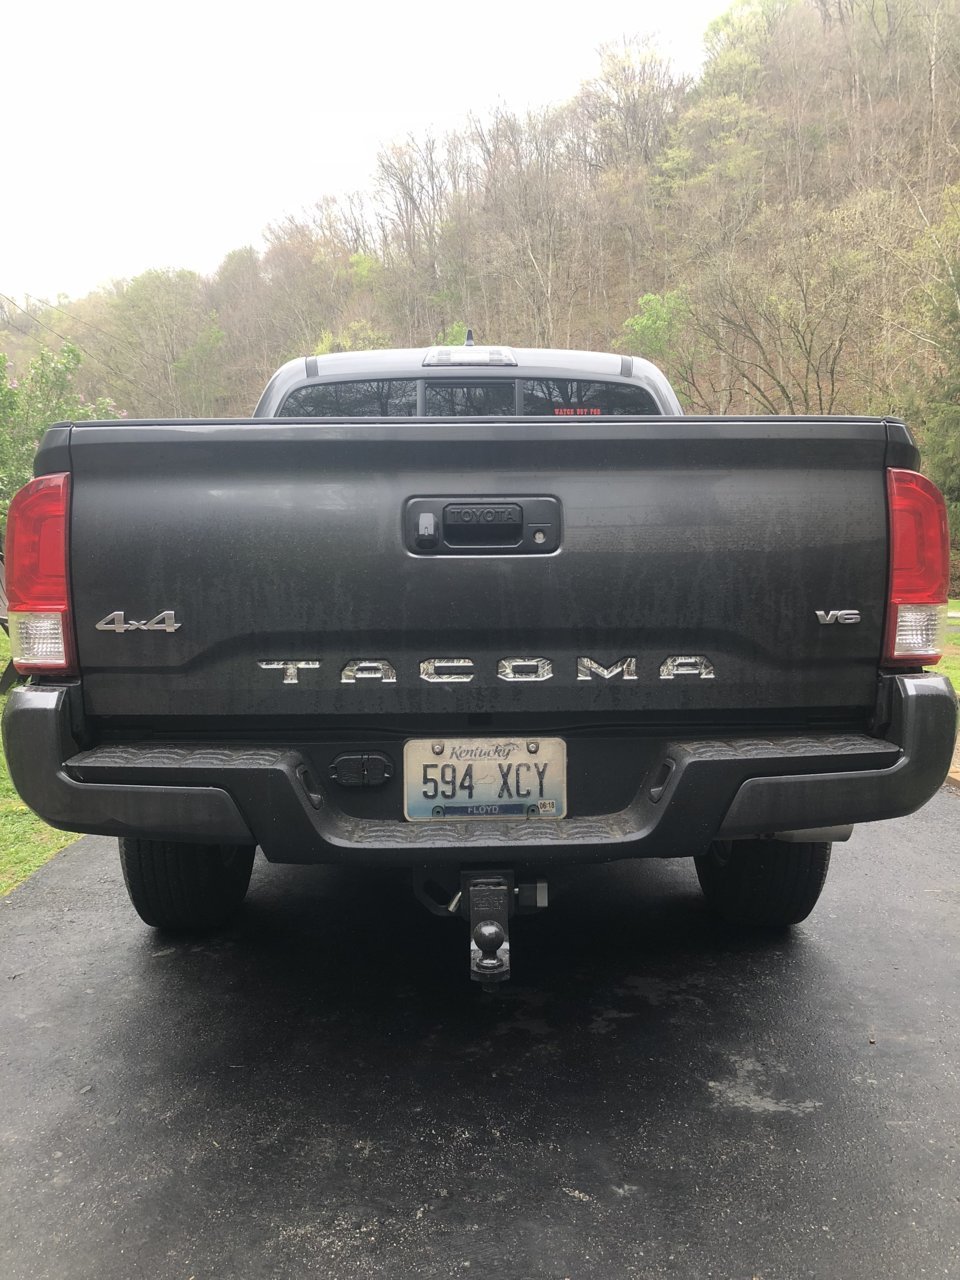 Continue with the TACOMA and TRD 4X4SPORT debadging?